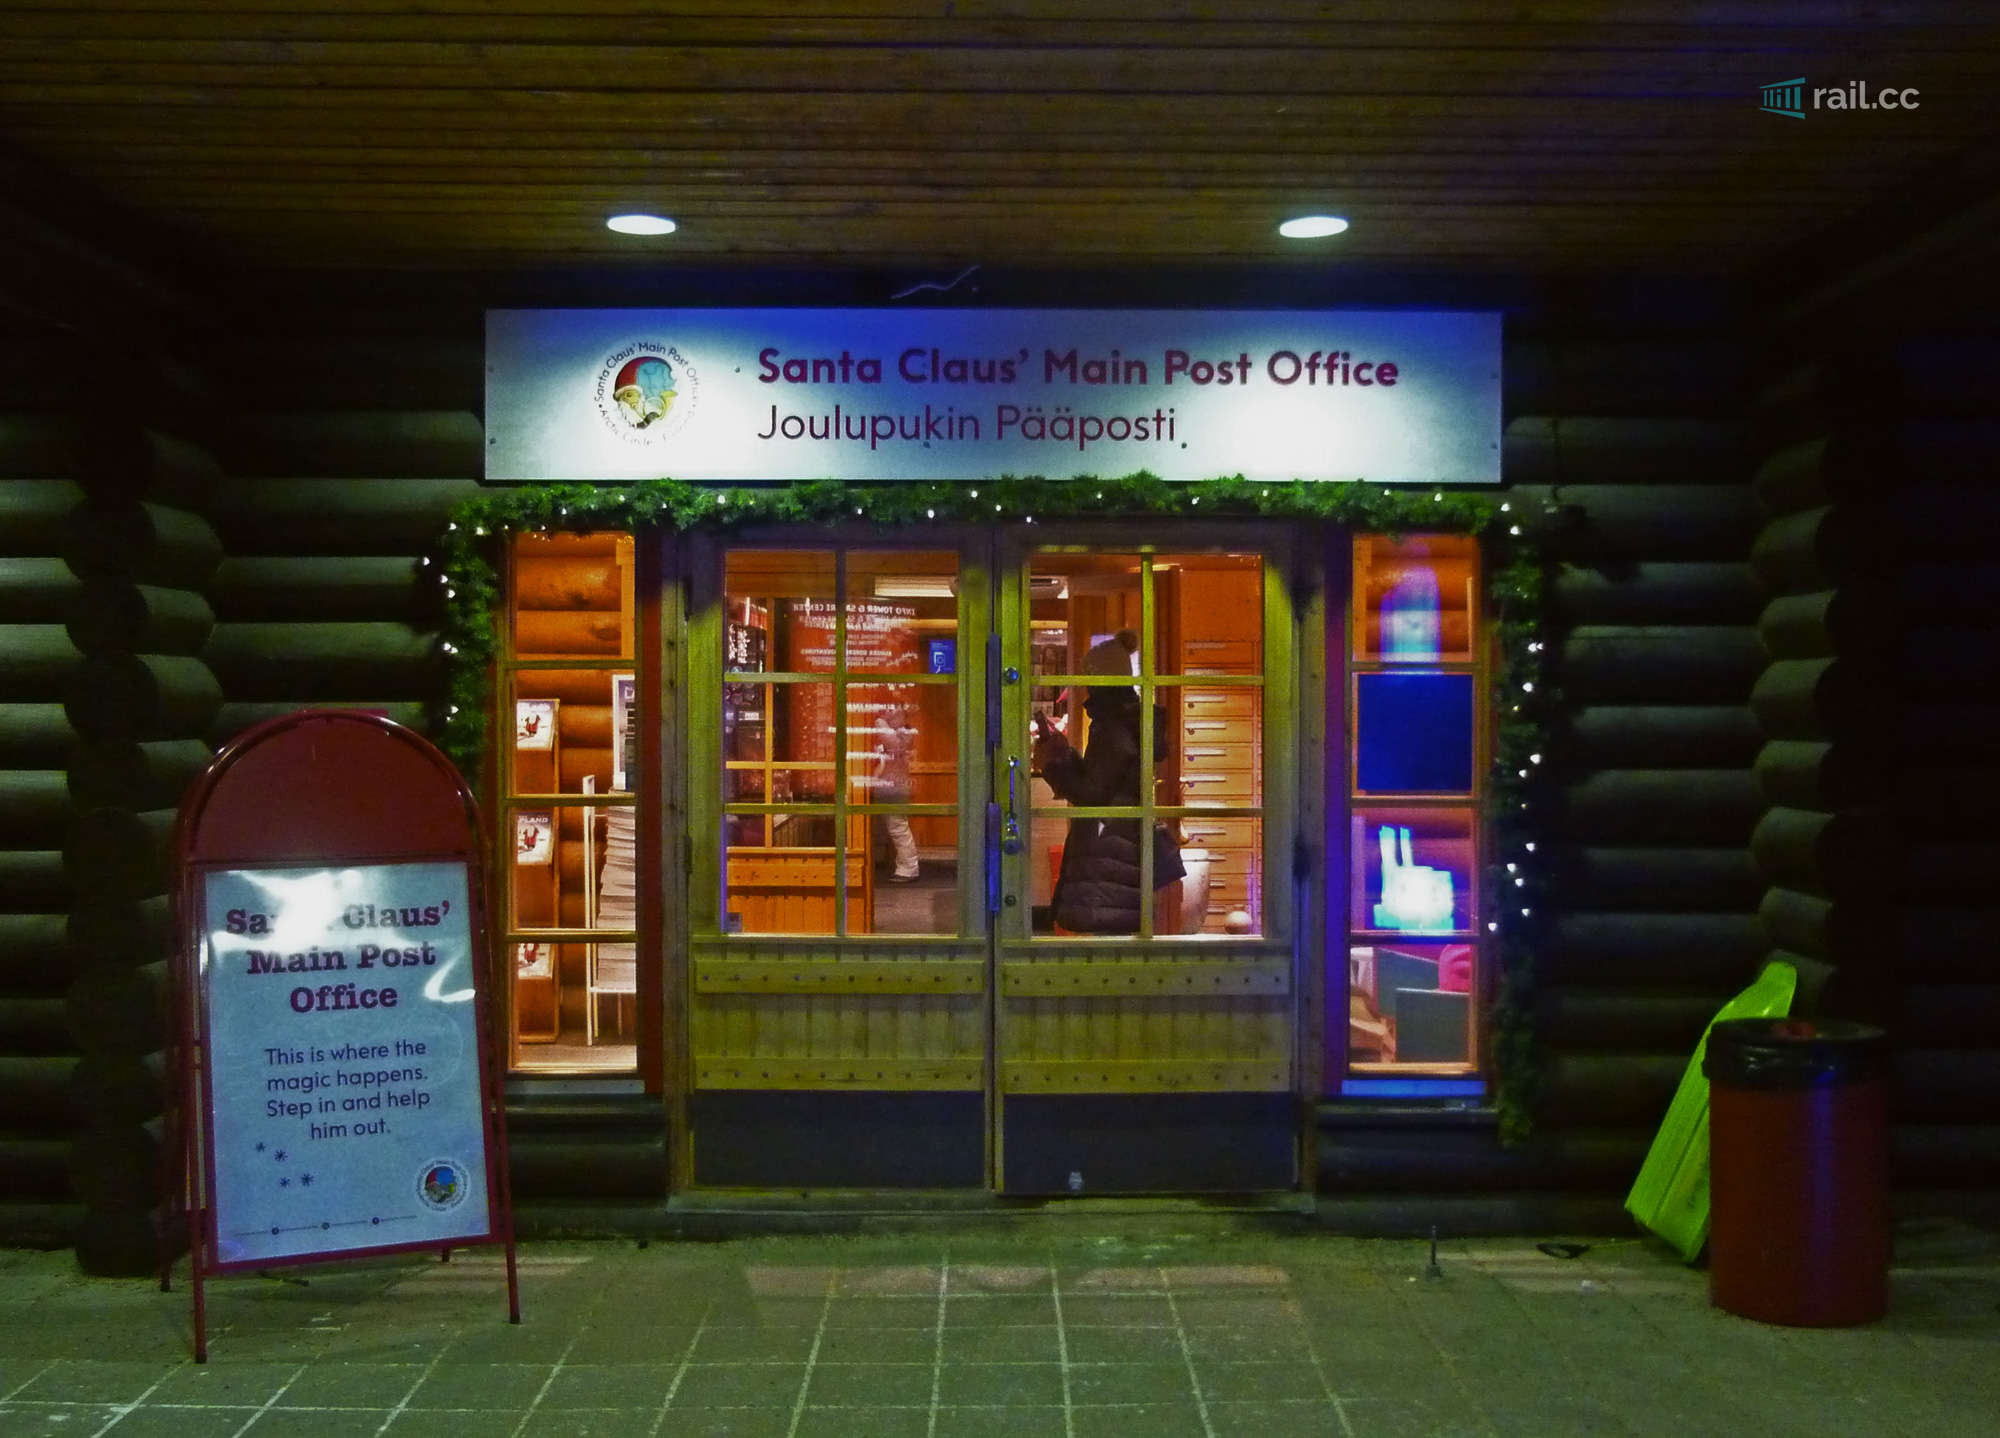 The Santa Claus post office